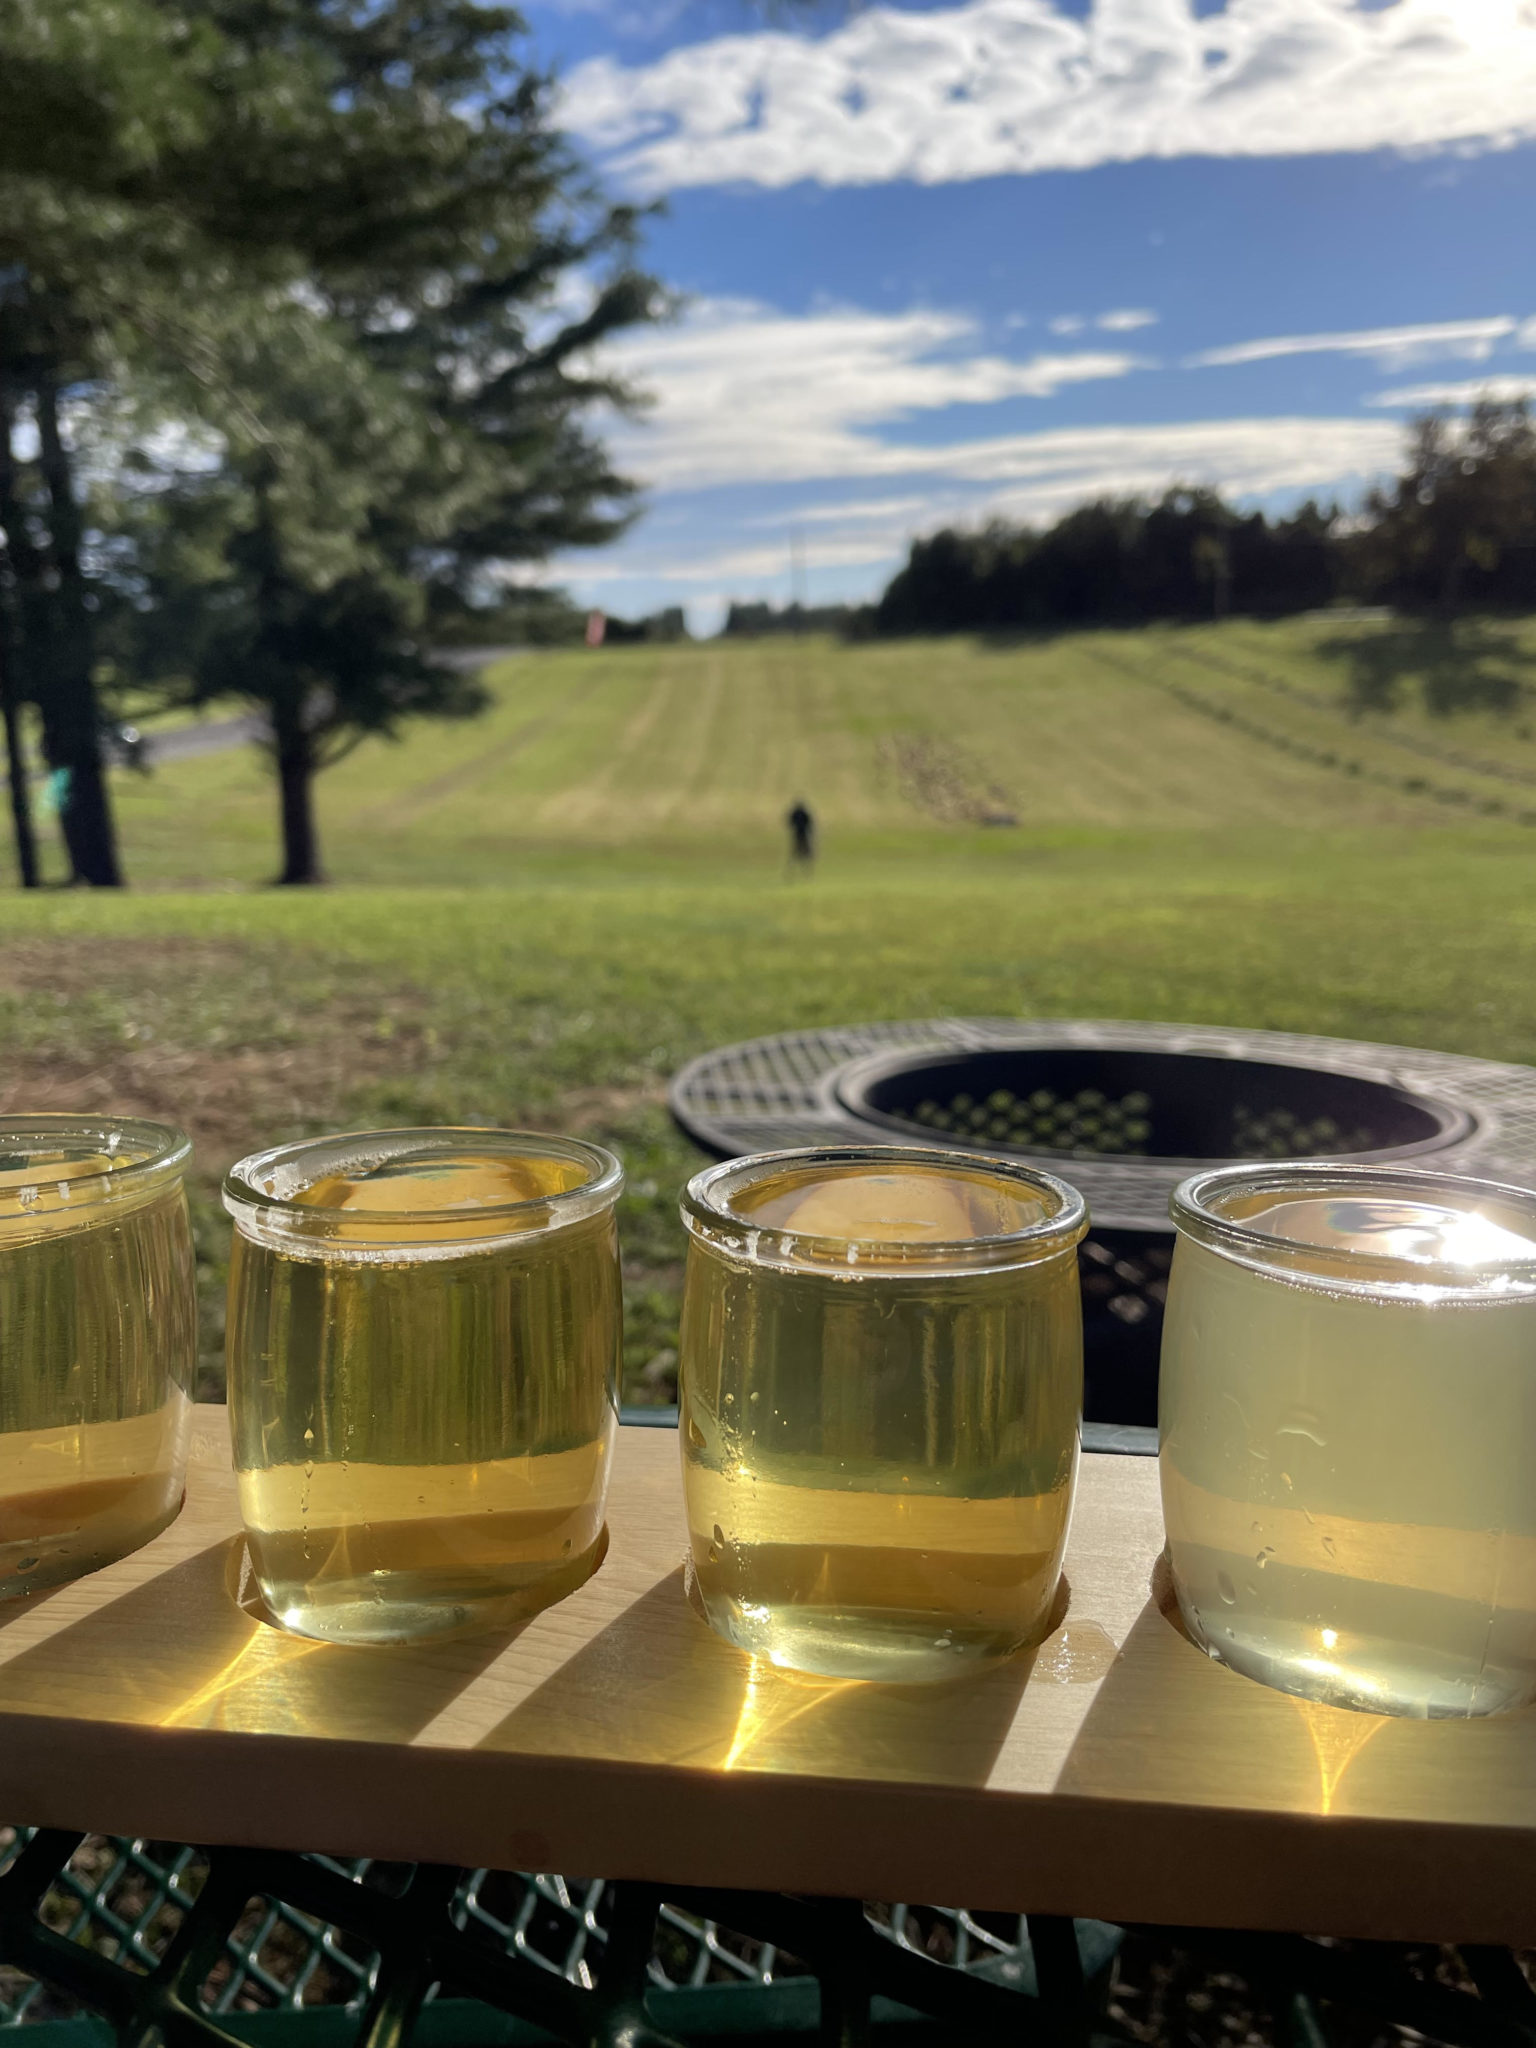 Along came a cider: 9 1/2 hours touring the makers of an increasingly popular beverage